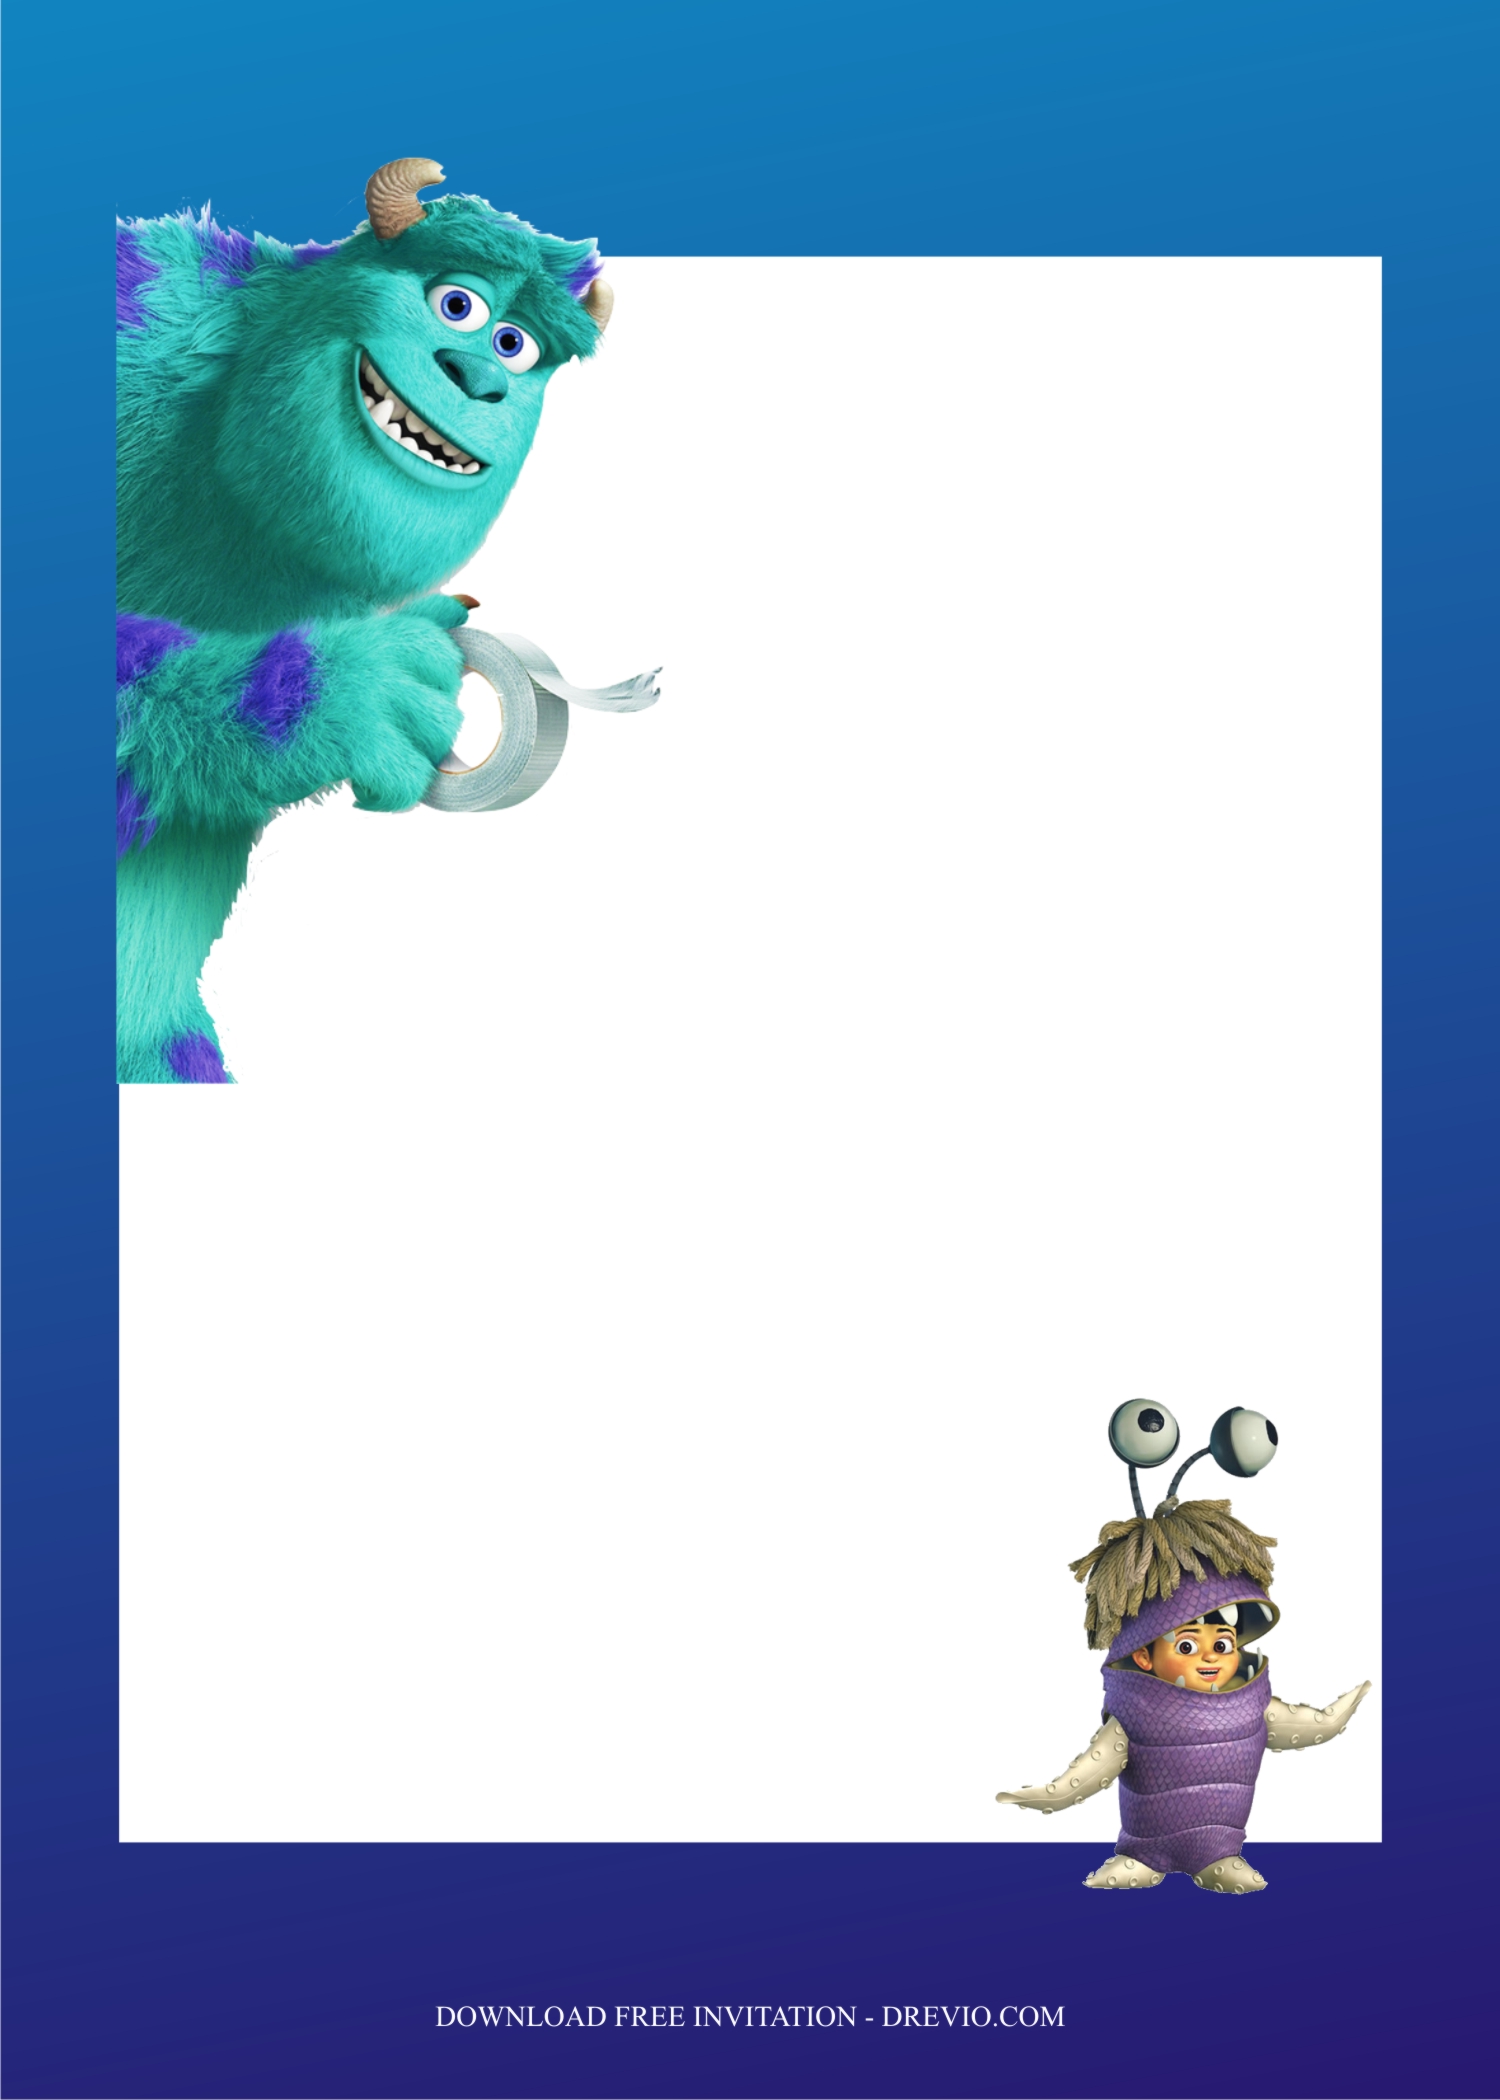 monsters-inc-invitation-template7-download-hundreds-free-printable